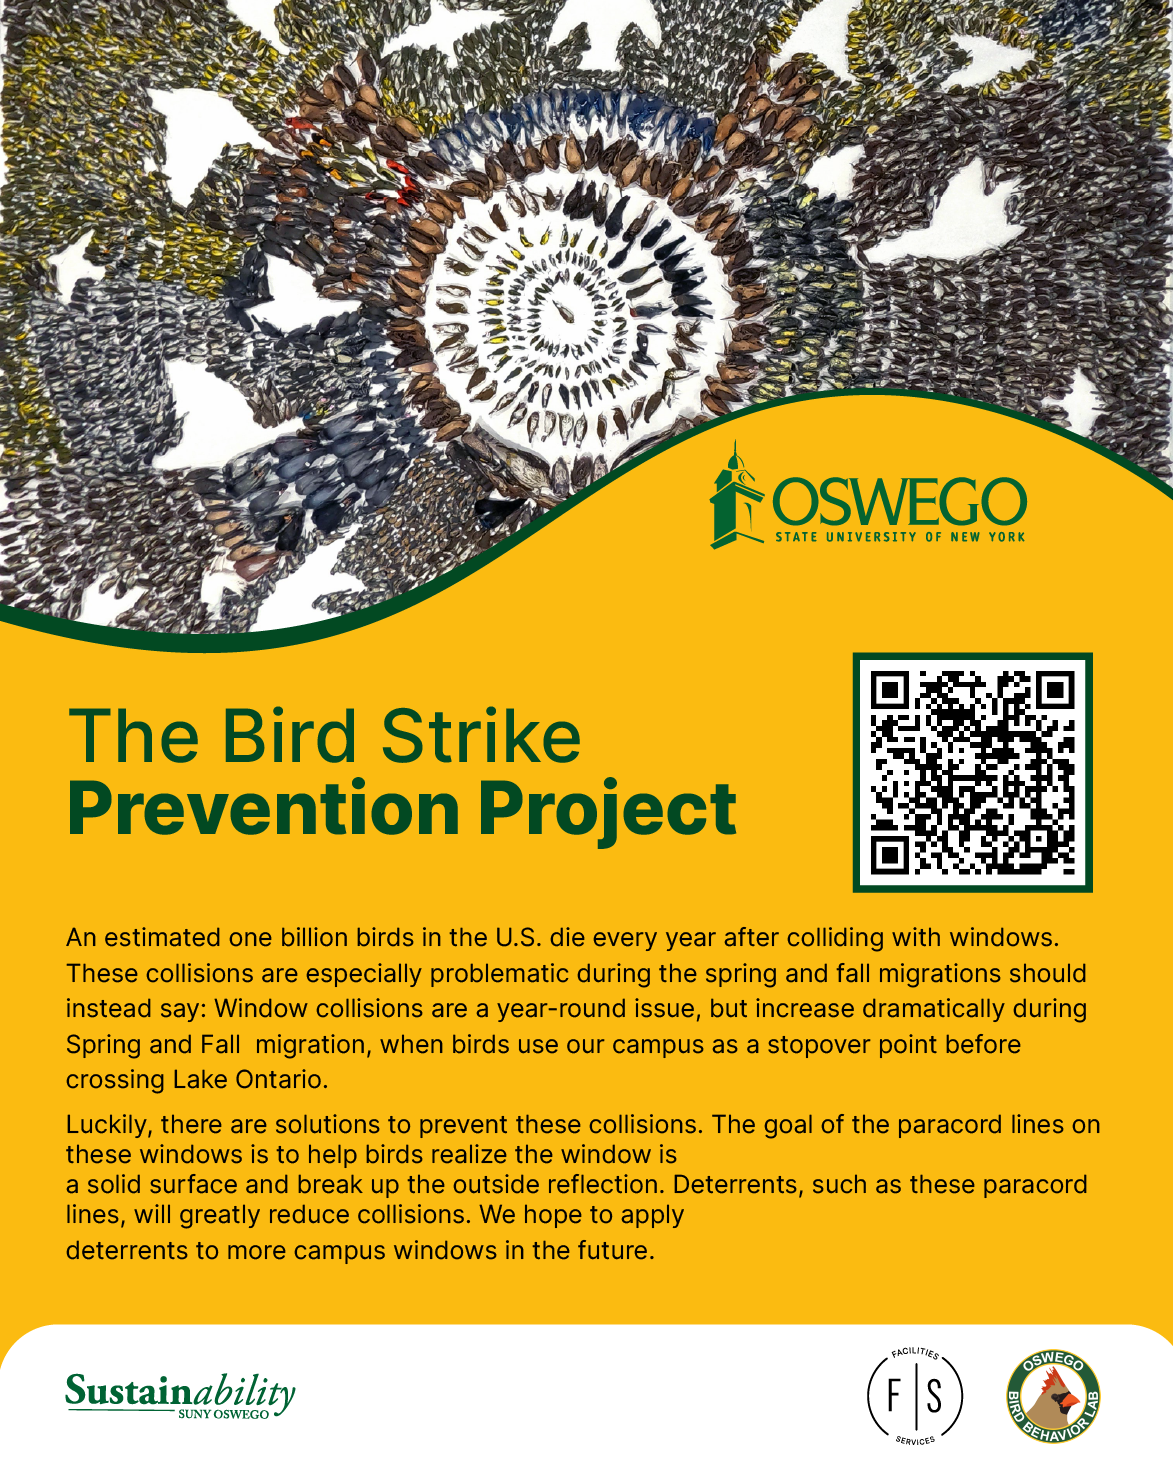 poster about bird prevention project